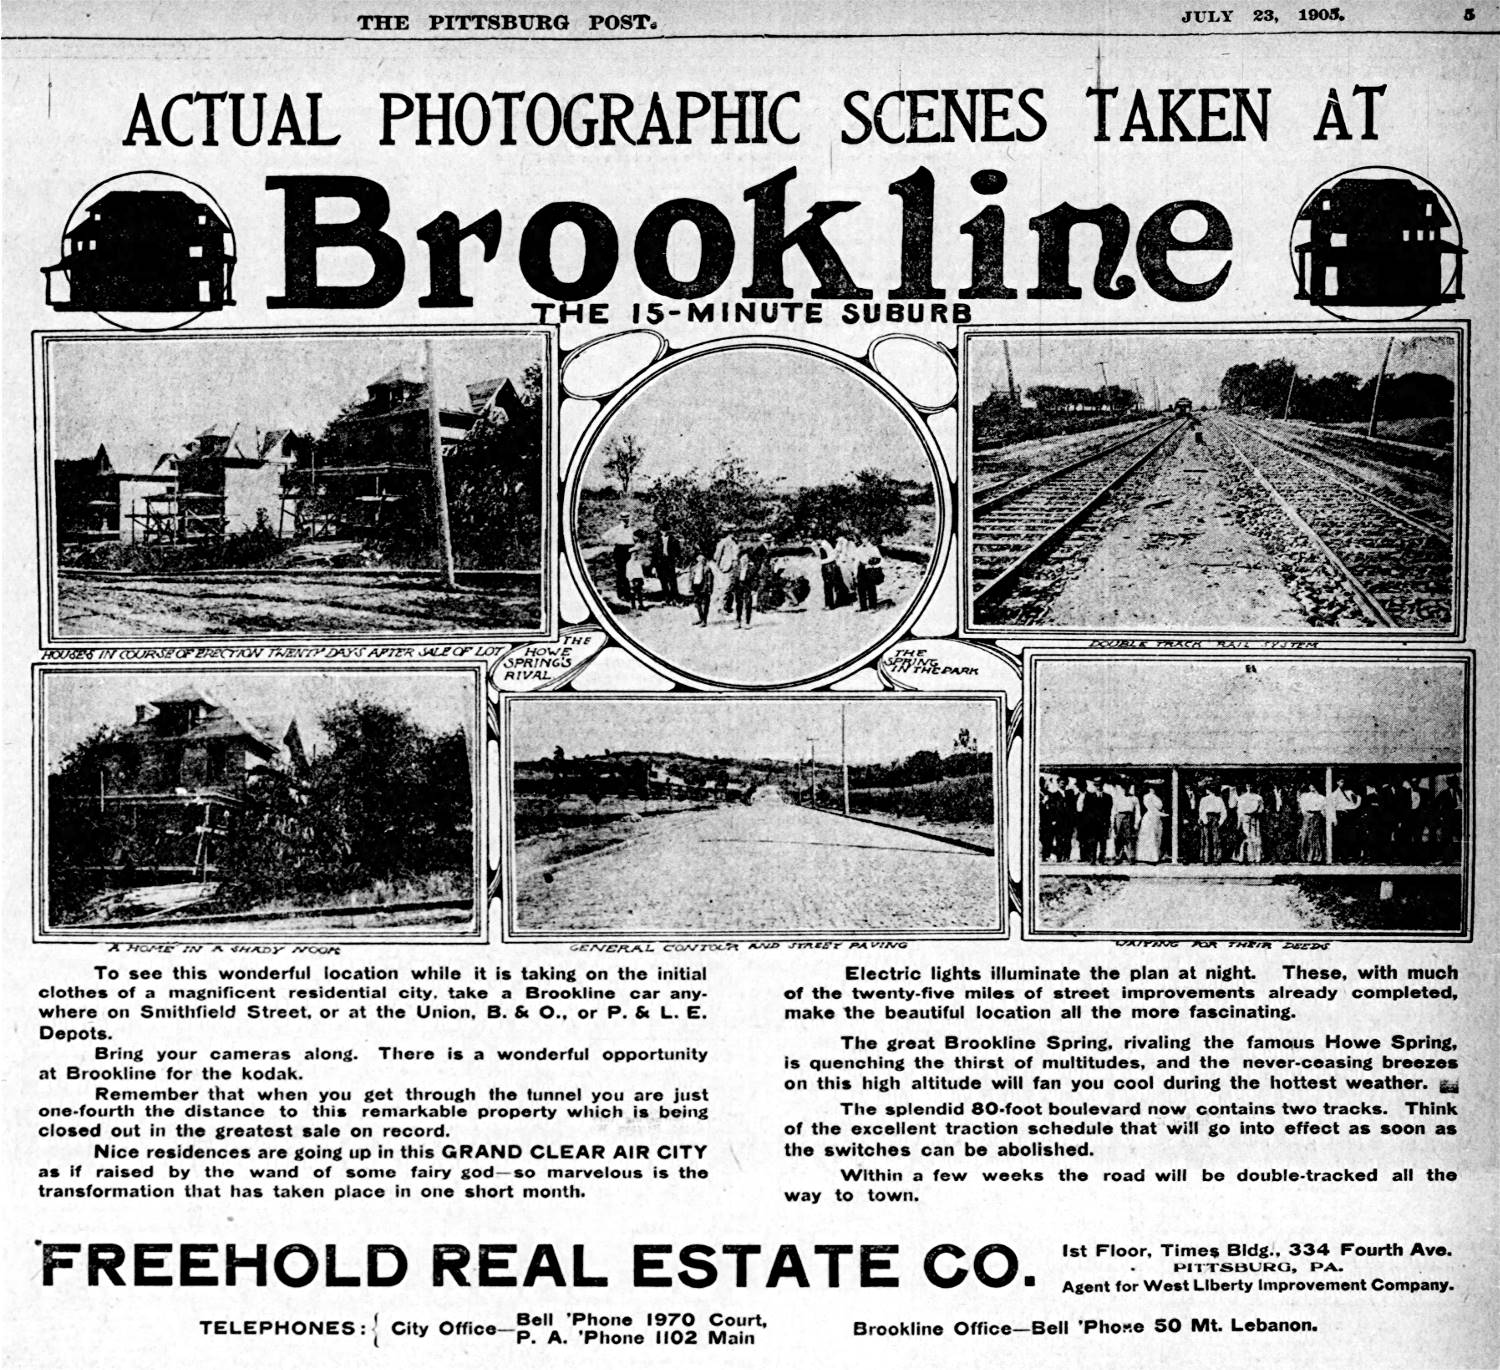 Real Estate Advertisement - July 23, 1905.